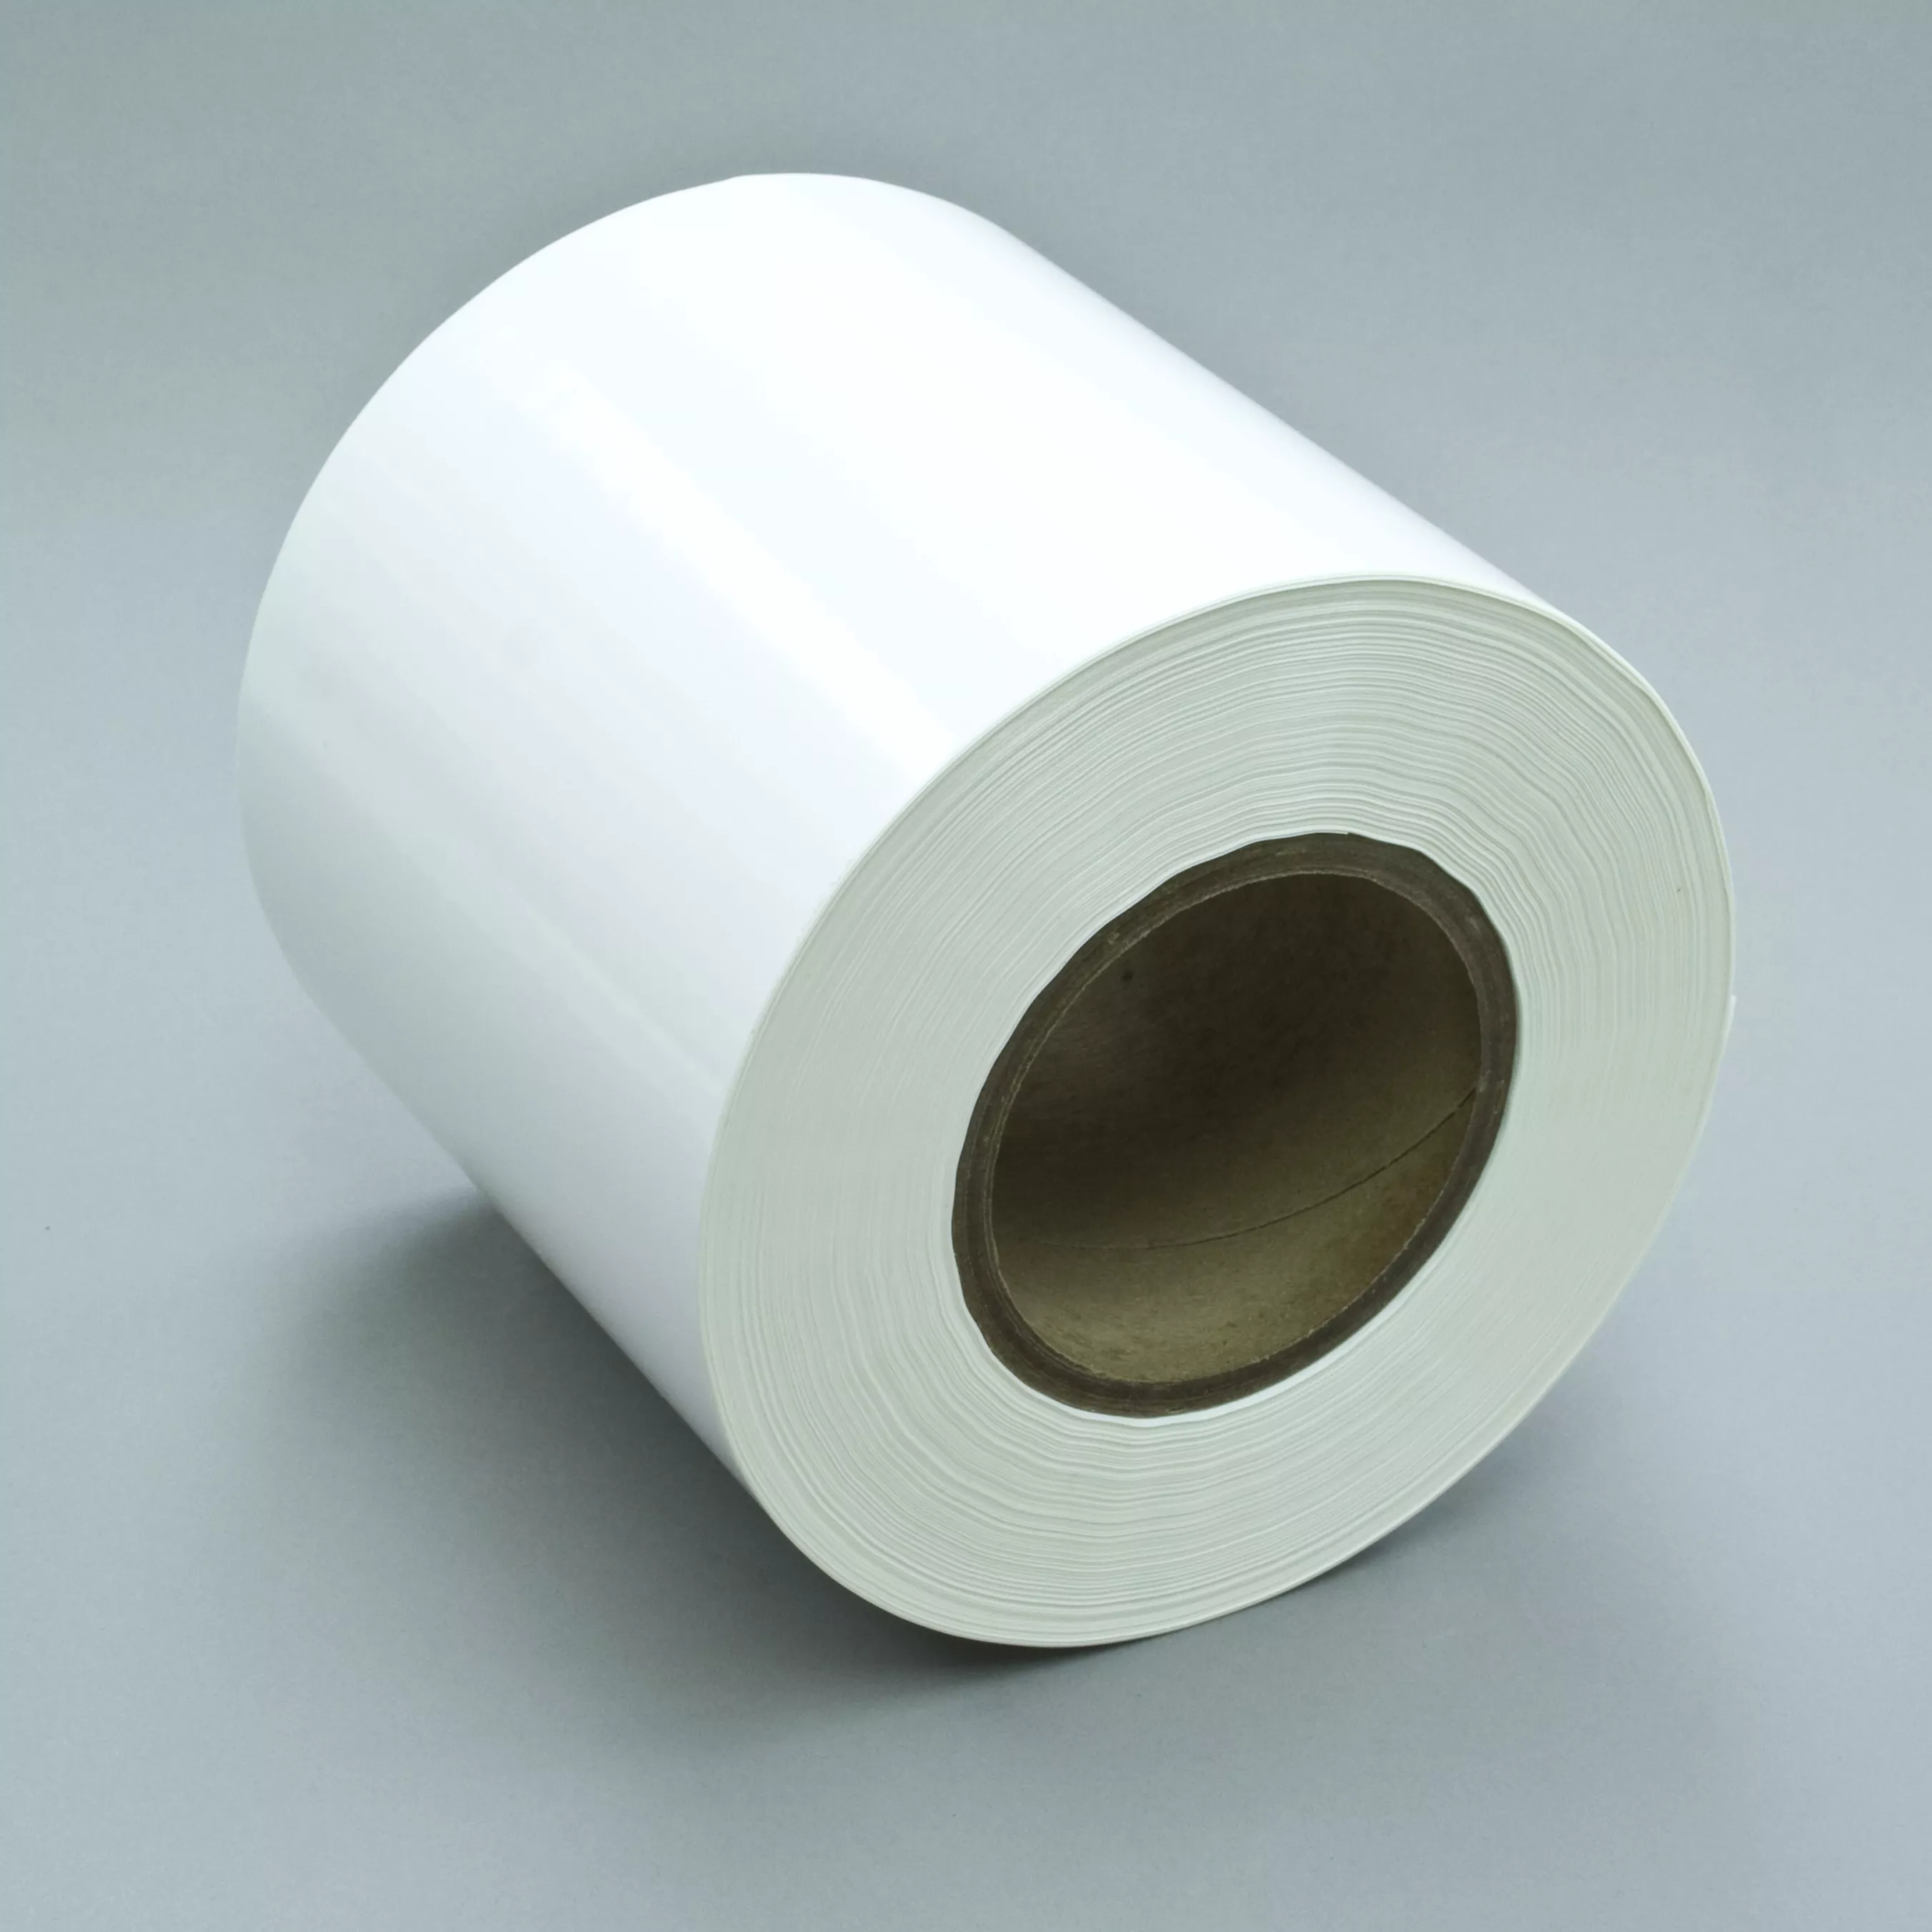 3M™ Sheet and Screen Label Material 7931, Radiant White, 508 mm x 686 mm, 100 Sheet/Case